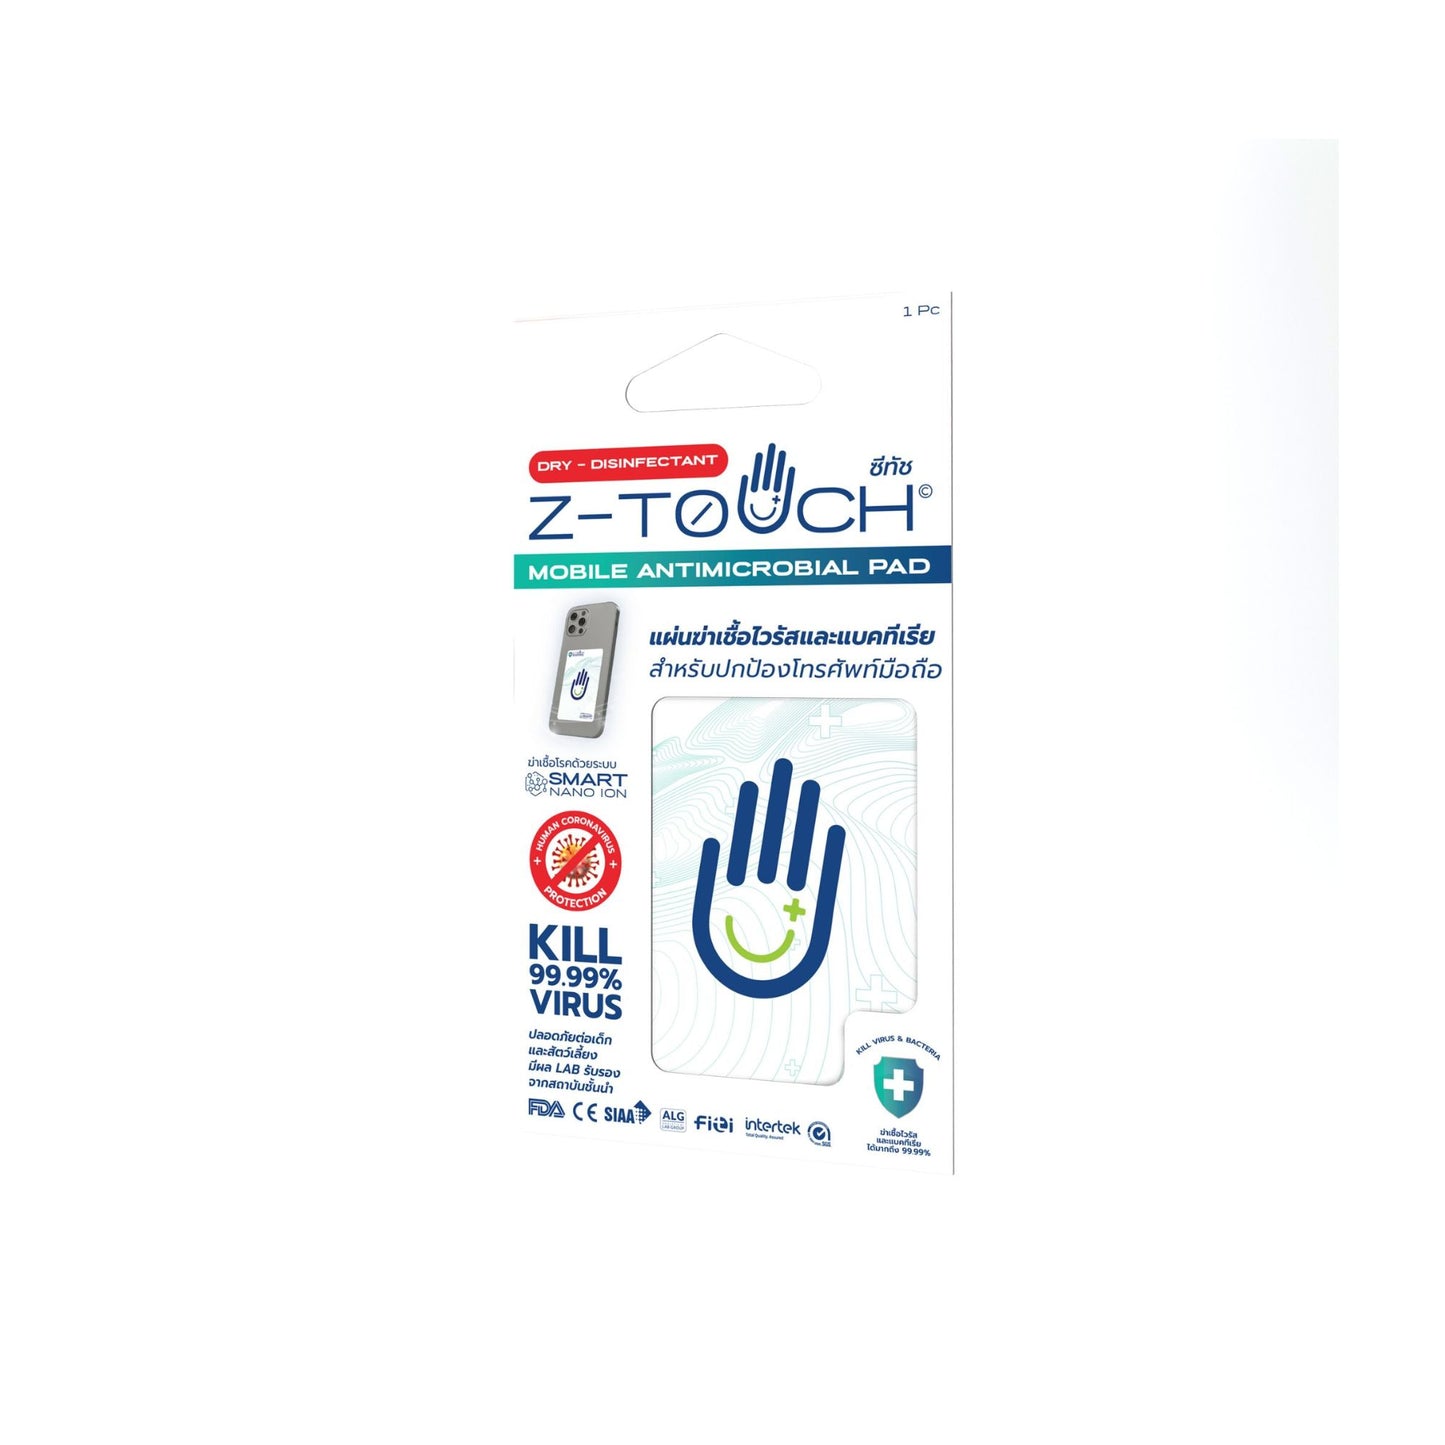 Z-Touch Mobile Phone Self-cleaning Antimicrobial Pad-Disinfection Sheet | Effectively kills germs and bacteria